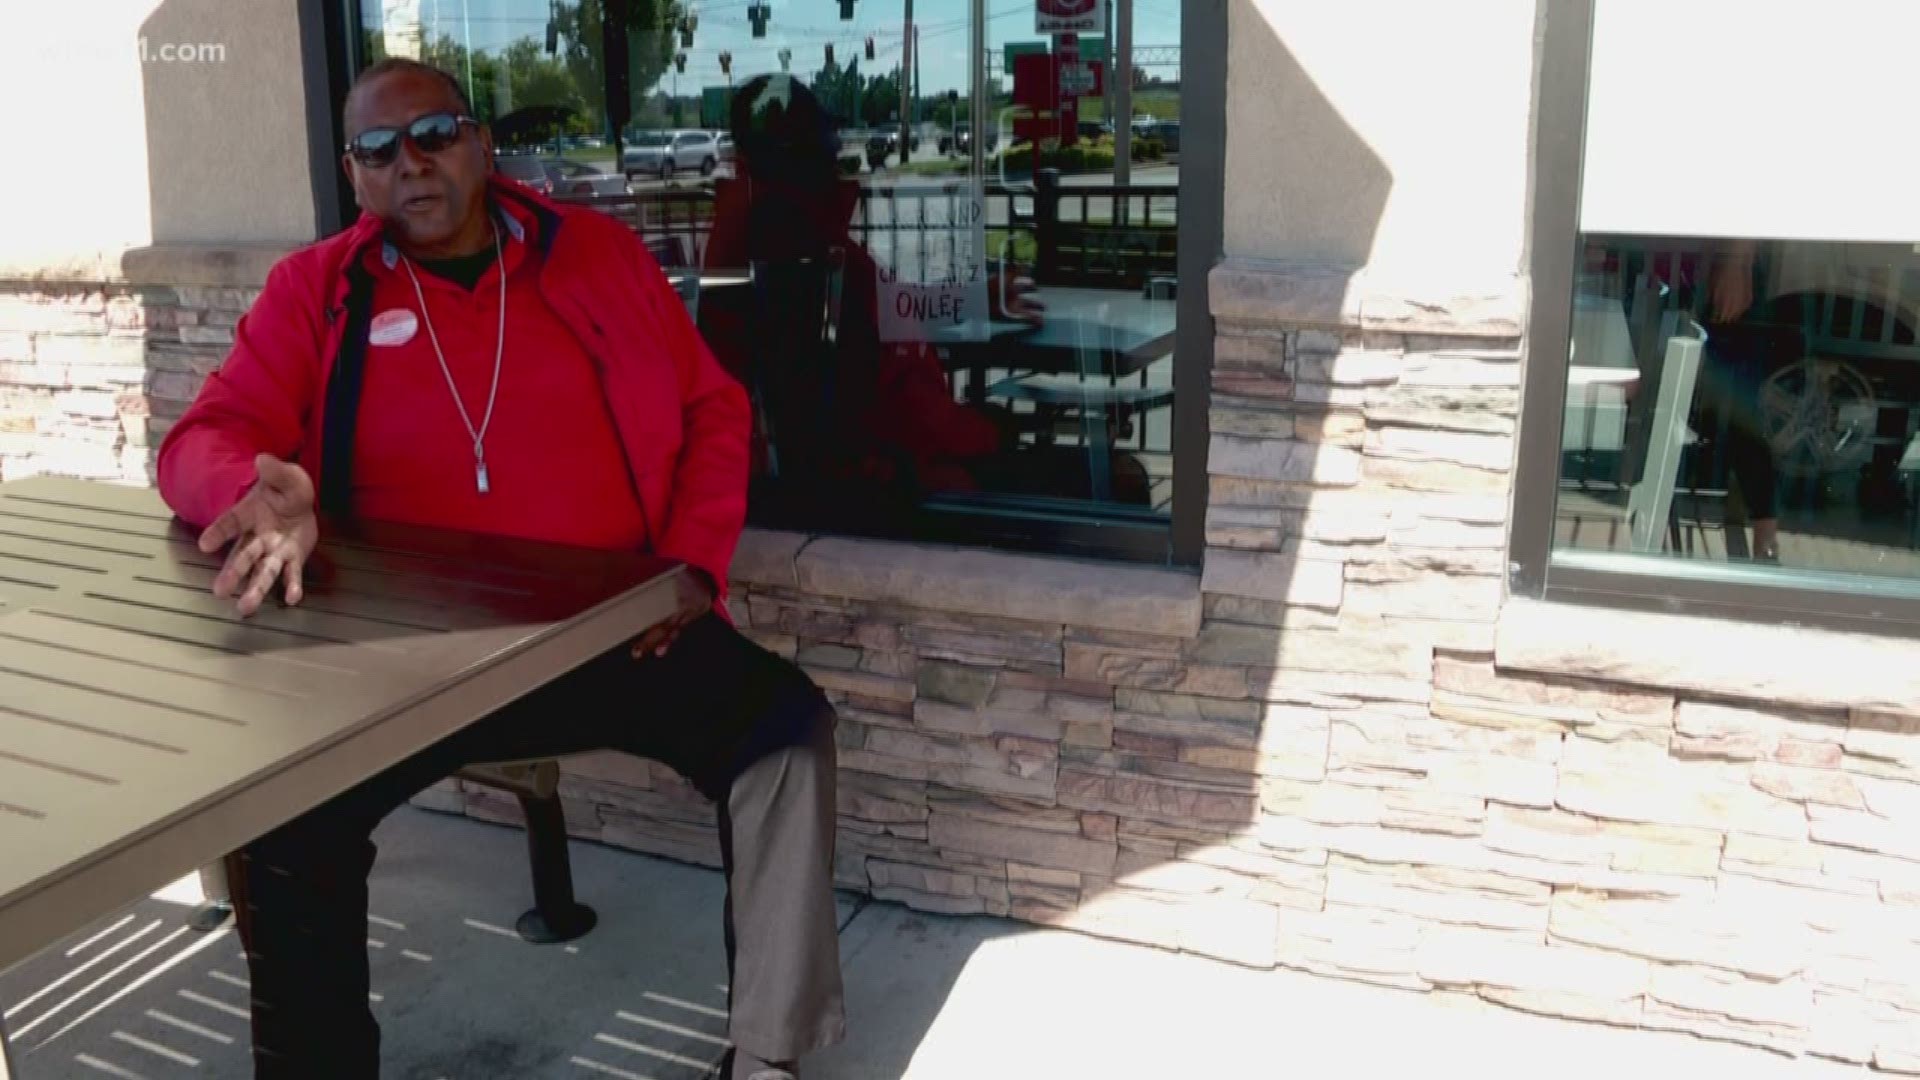 You'll find George Crawford at the St. Matthews Chick-fil-A five days a week, sharing his smile and songs.